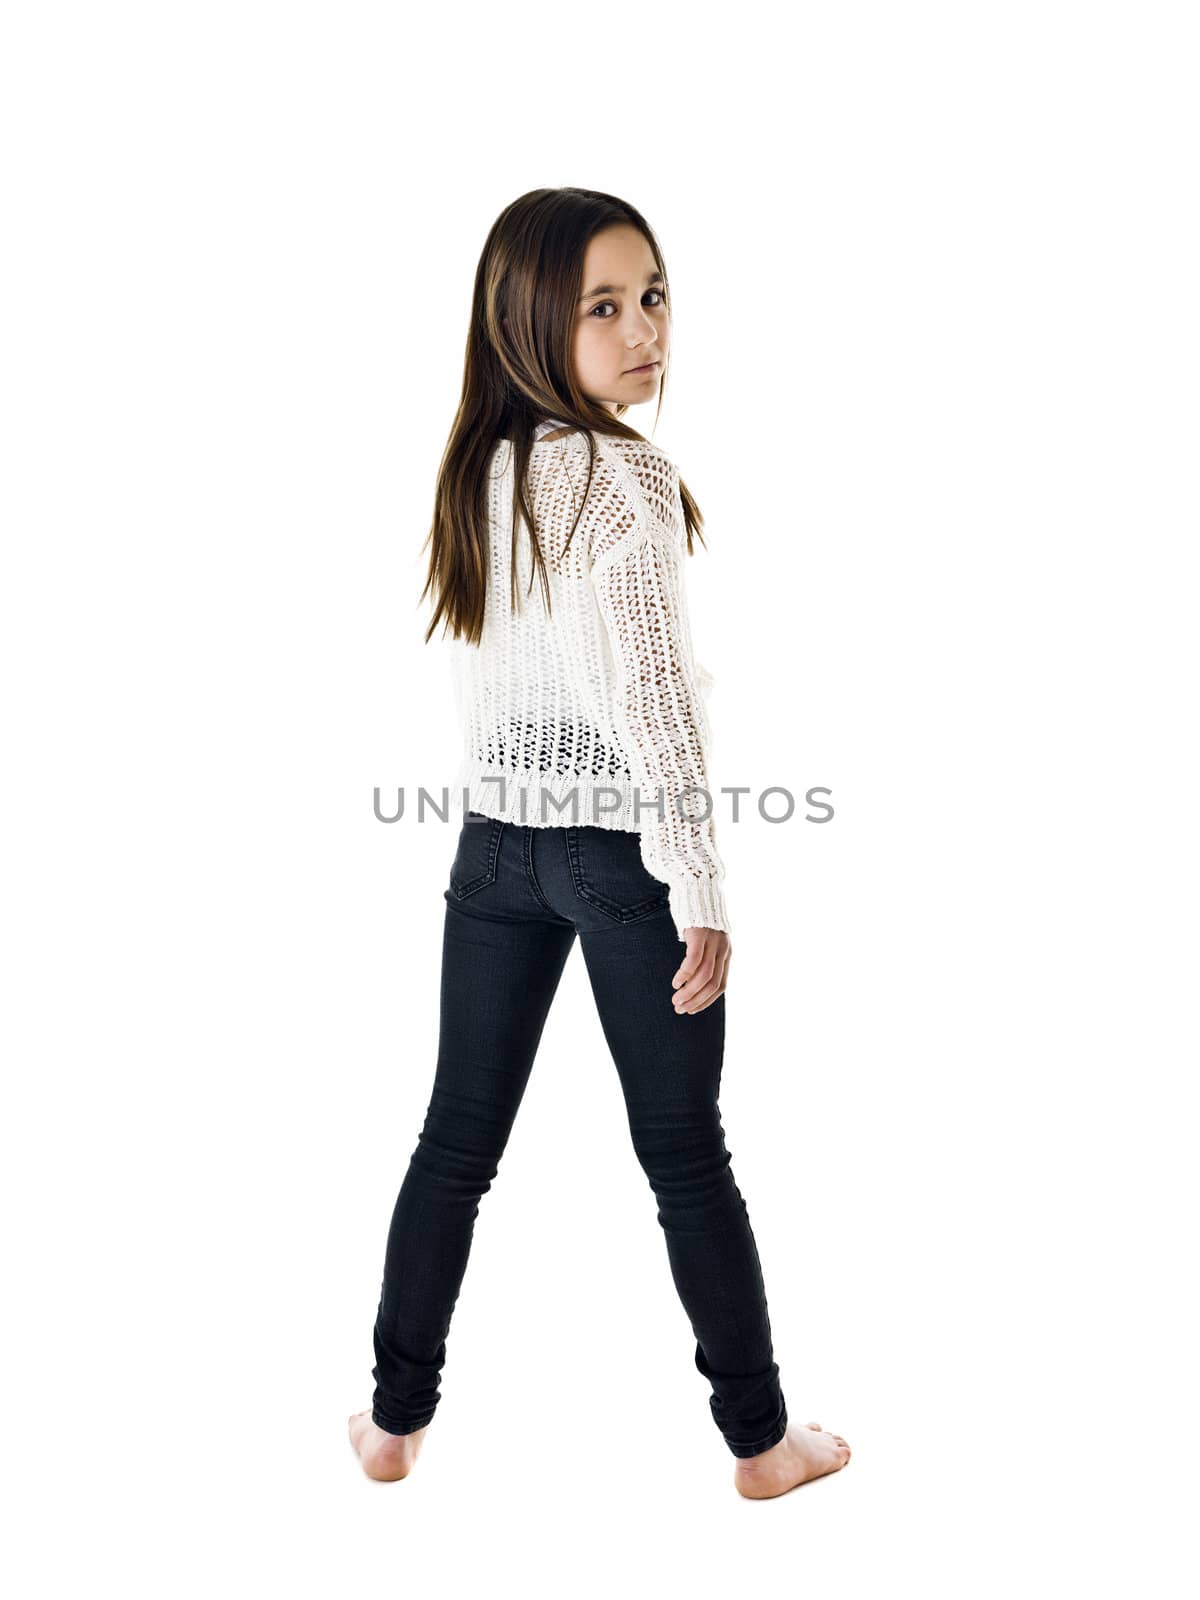 Portrait of a young girl isolated on white background